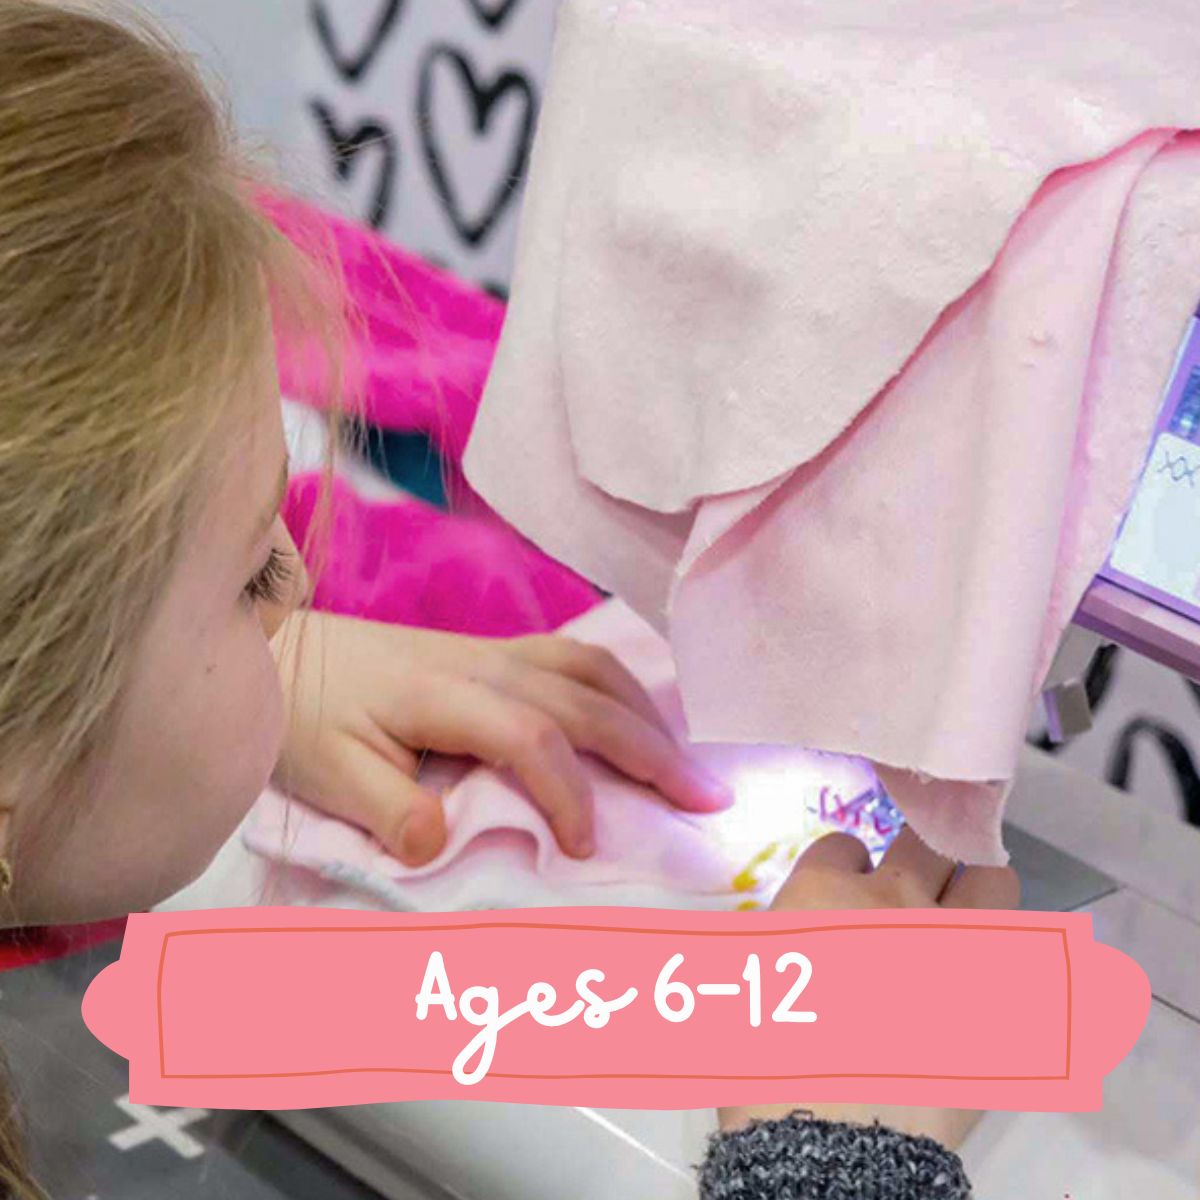 sewing and design camps for kids